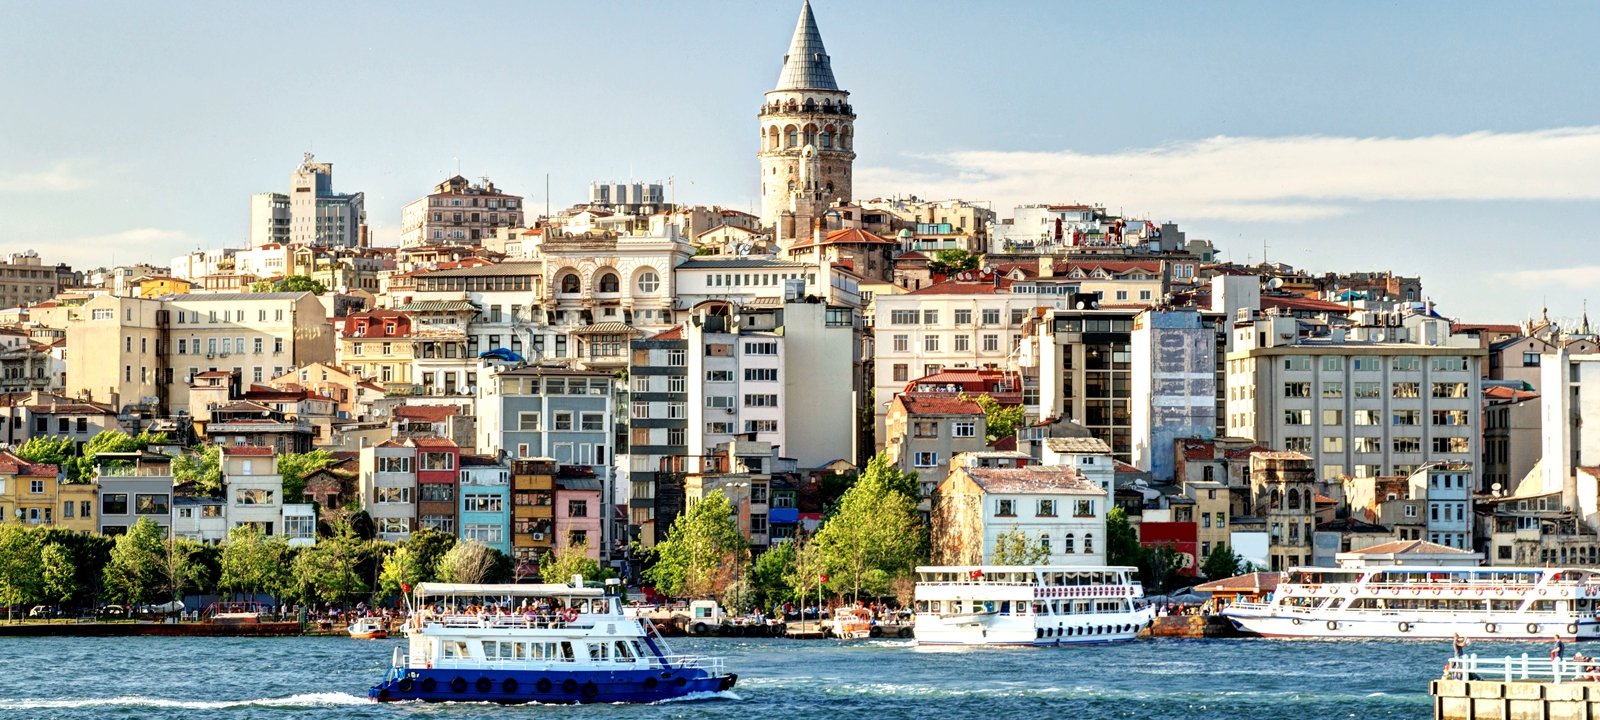 How to cruise down the Bosphorus in Istanbul